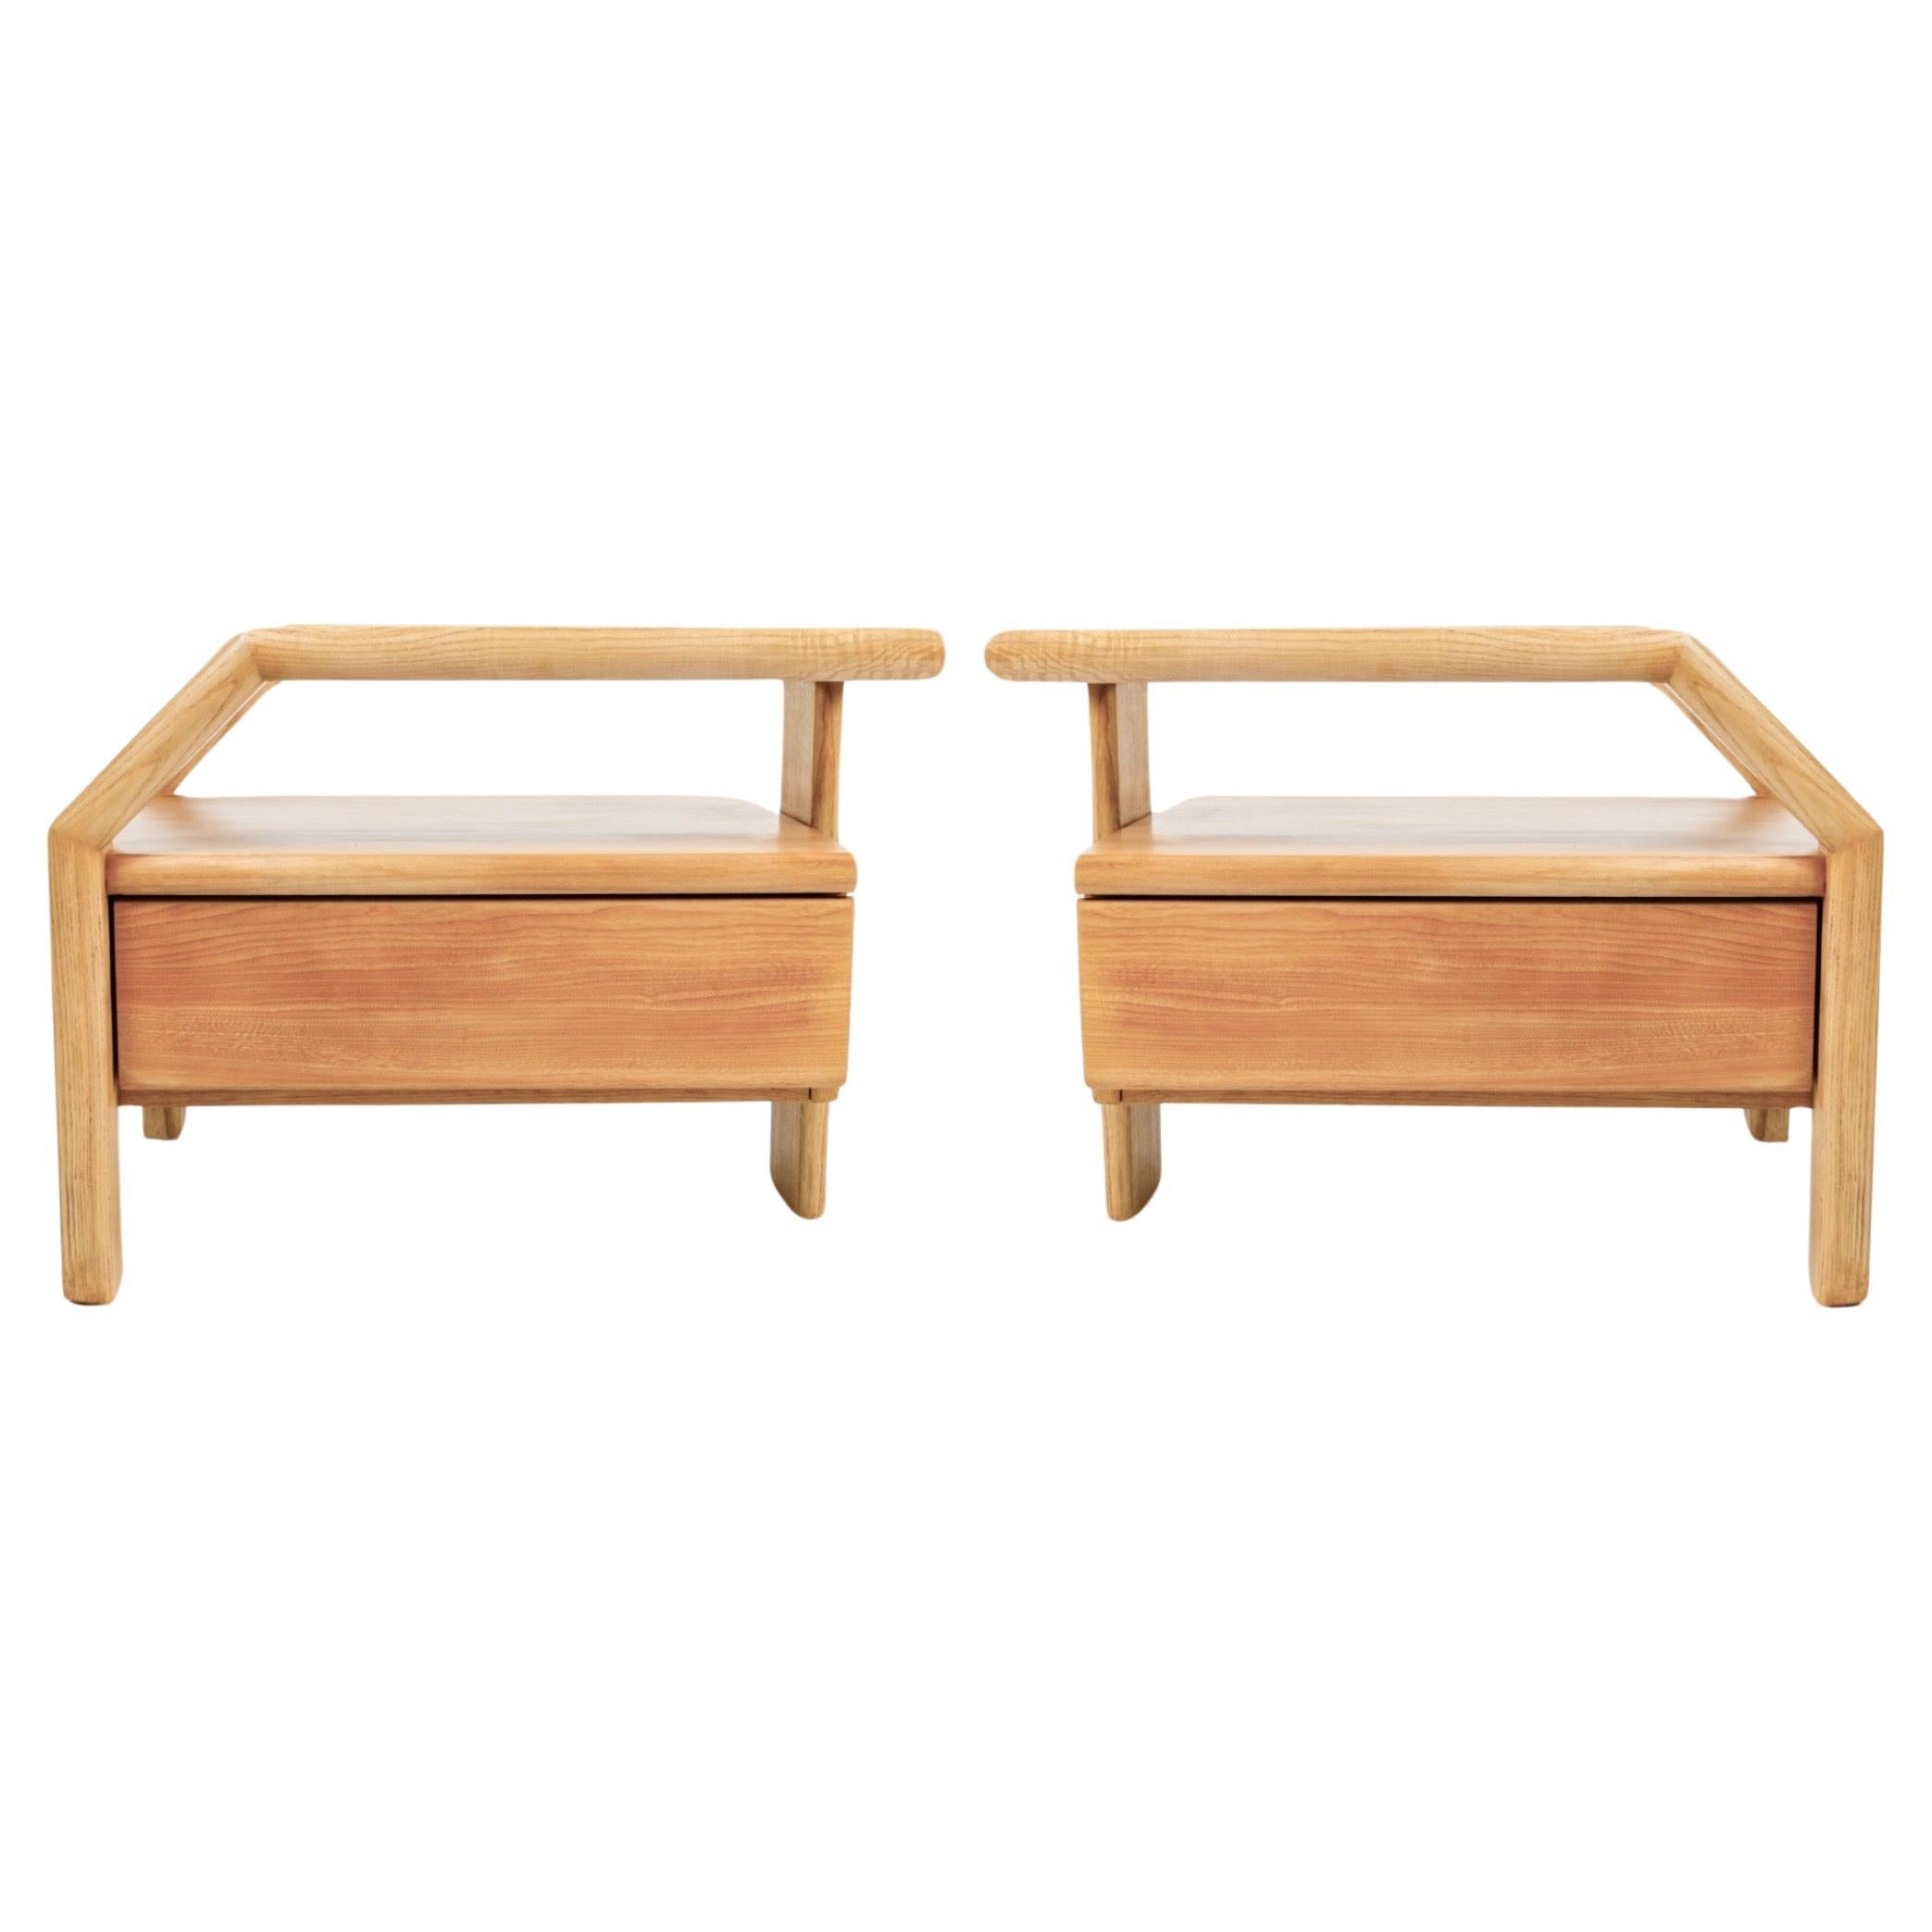 1970 Pair of bedside tables by Maison Roche